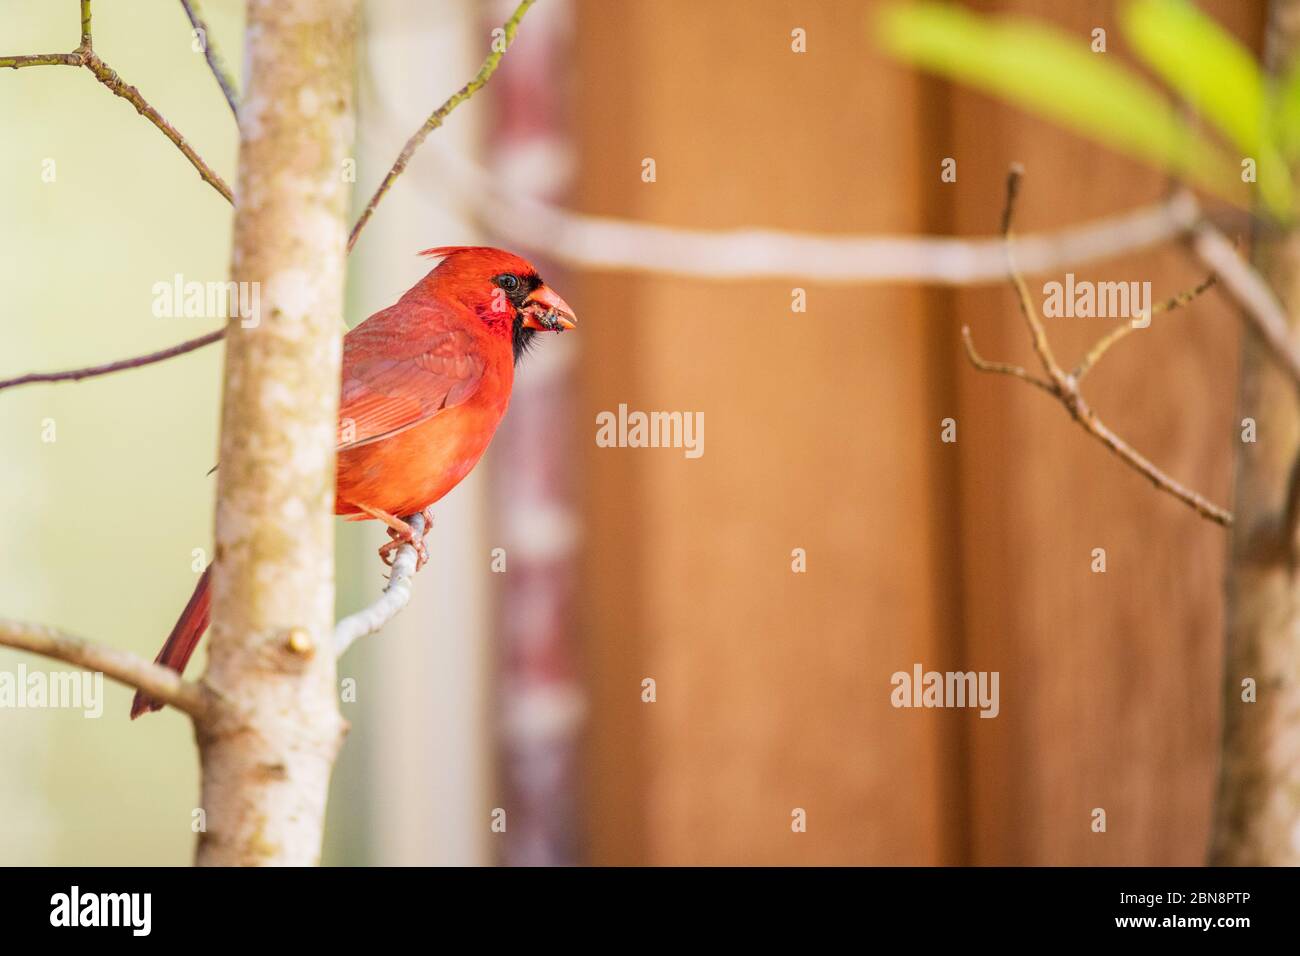 Male Northern Cardinal bird, Cardinalis Cardinalis, perched on a tree limb with food for his young chicks in beak. Stock Photo